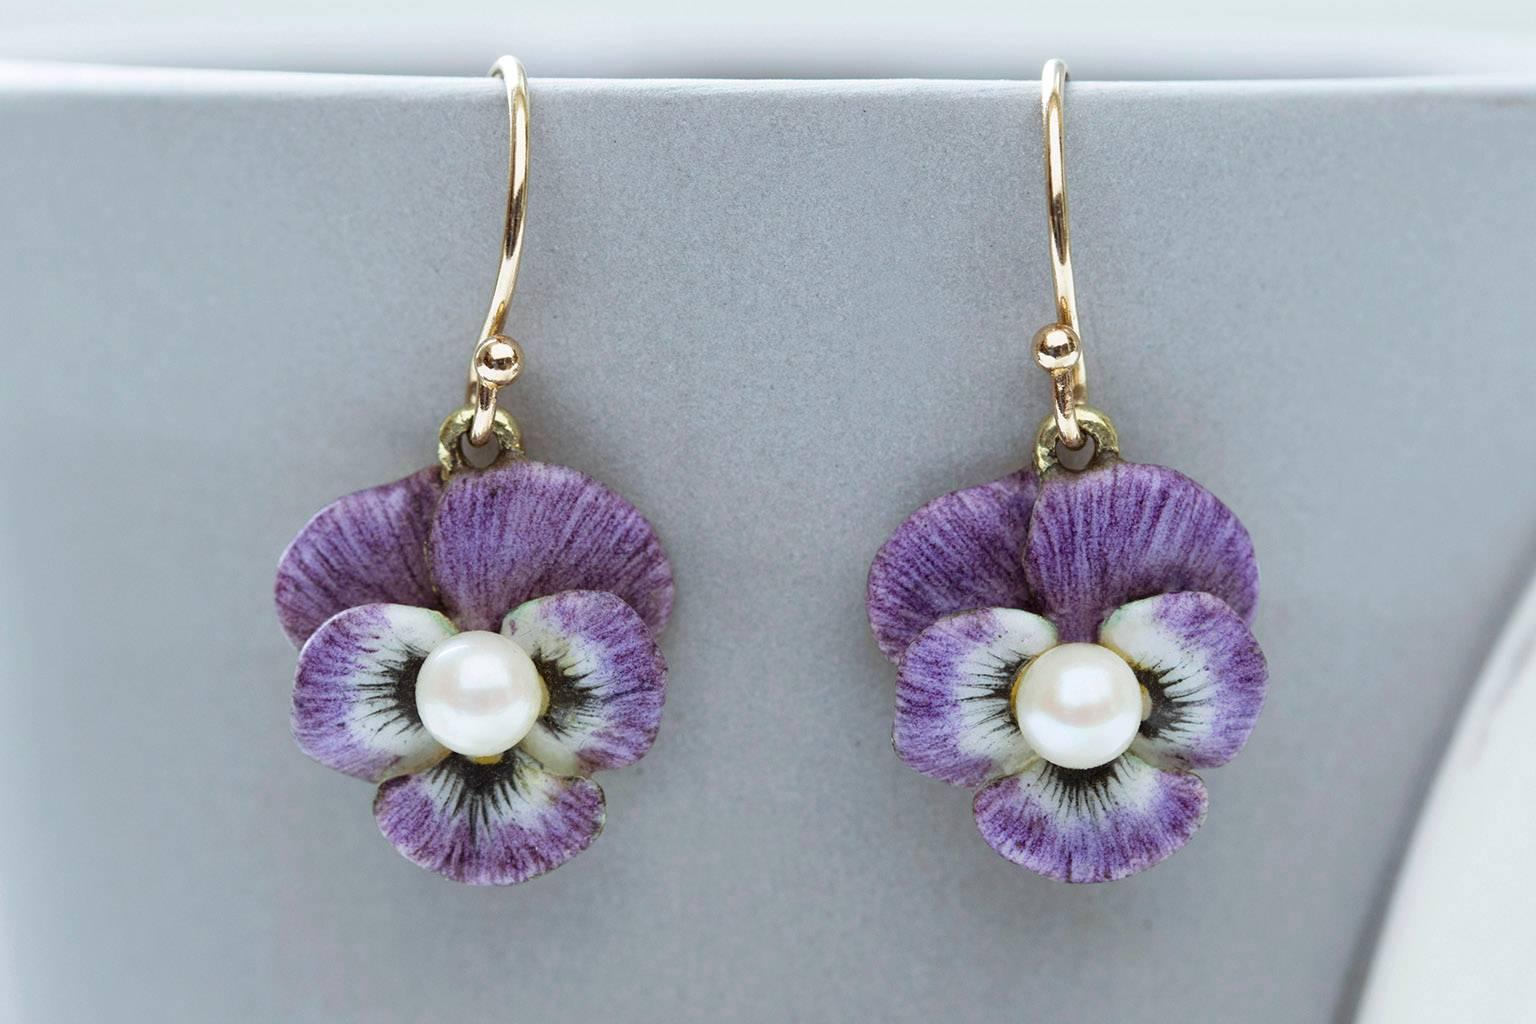 A delightful pair of Art Nouveau purple enamel pansy earrings. Each earring features a tiny pearl at its center, and has beautiful details in patterns of the flower petals. The earrings are lightweight, and very easy to wear. They are made of 14k